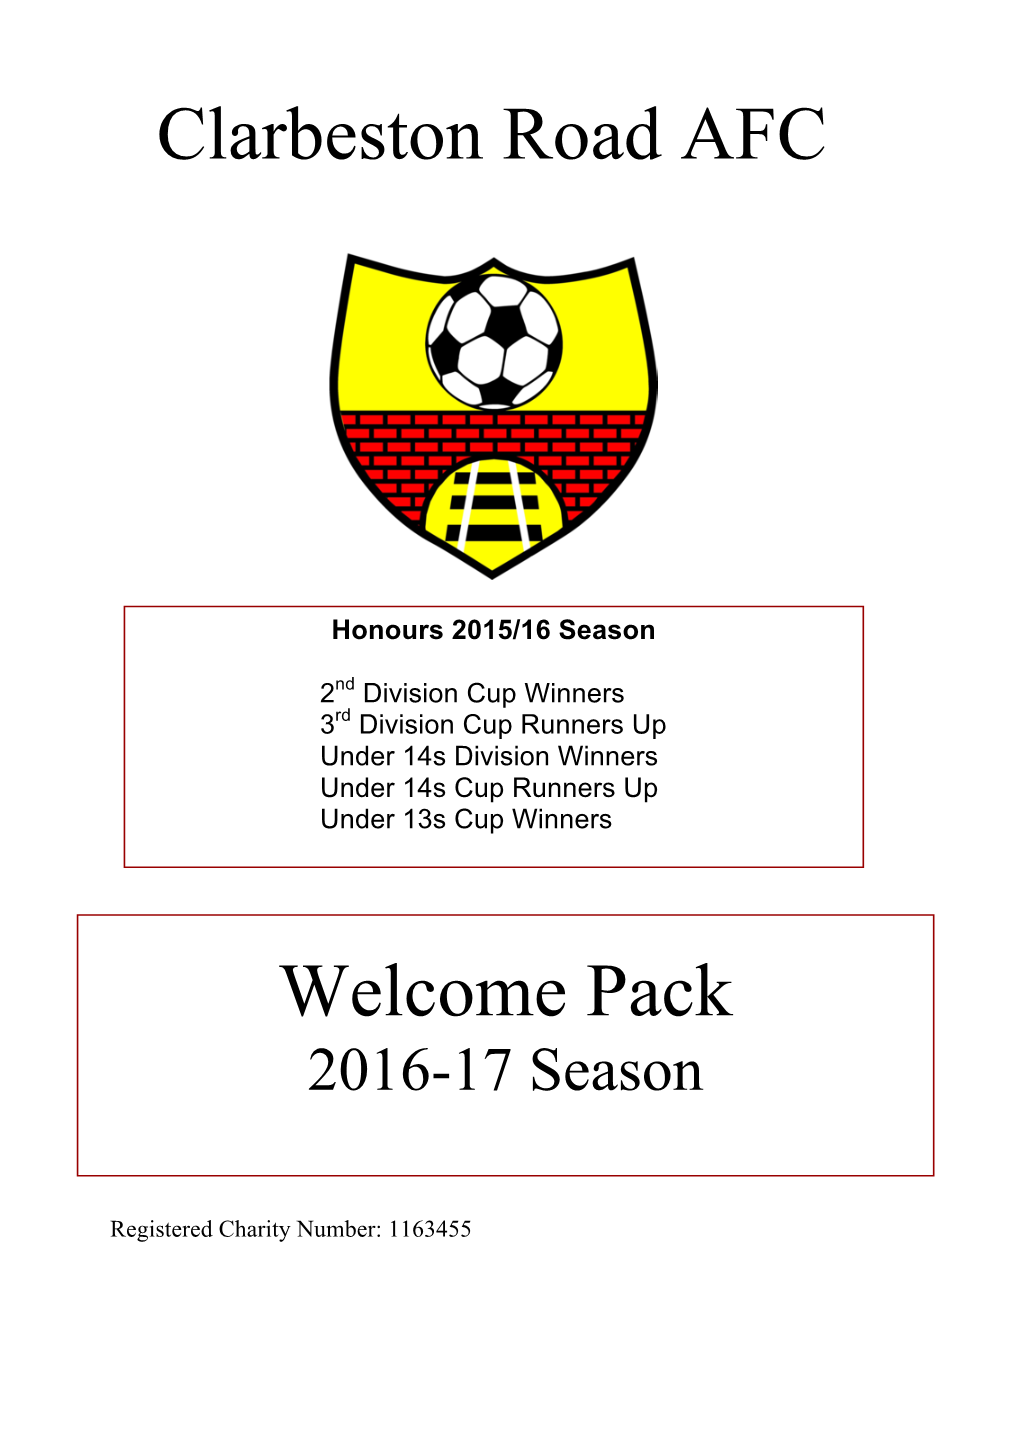 Clarbeston Road AFC Welcome Pack